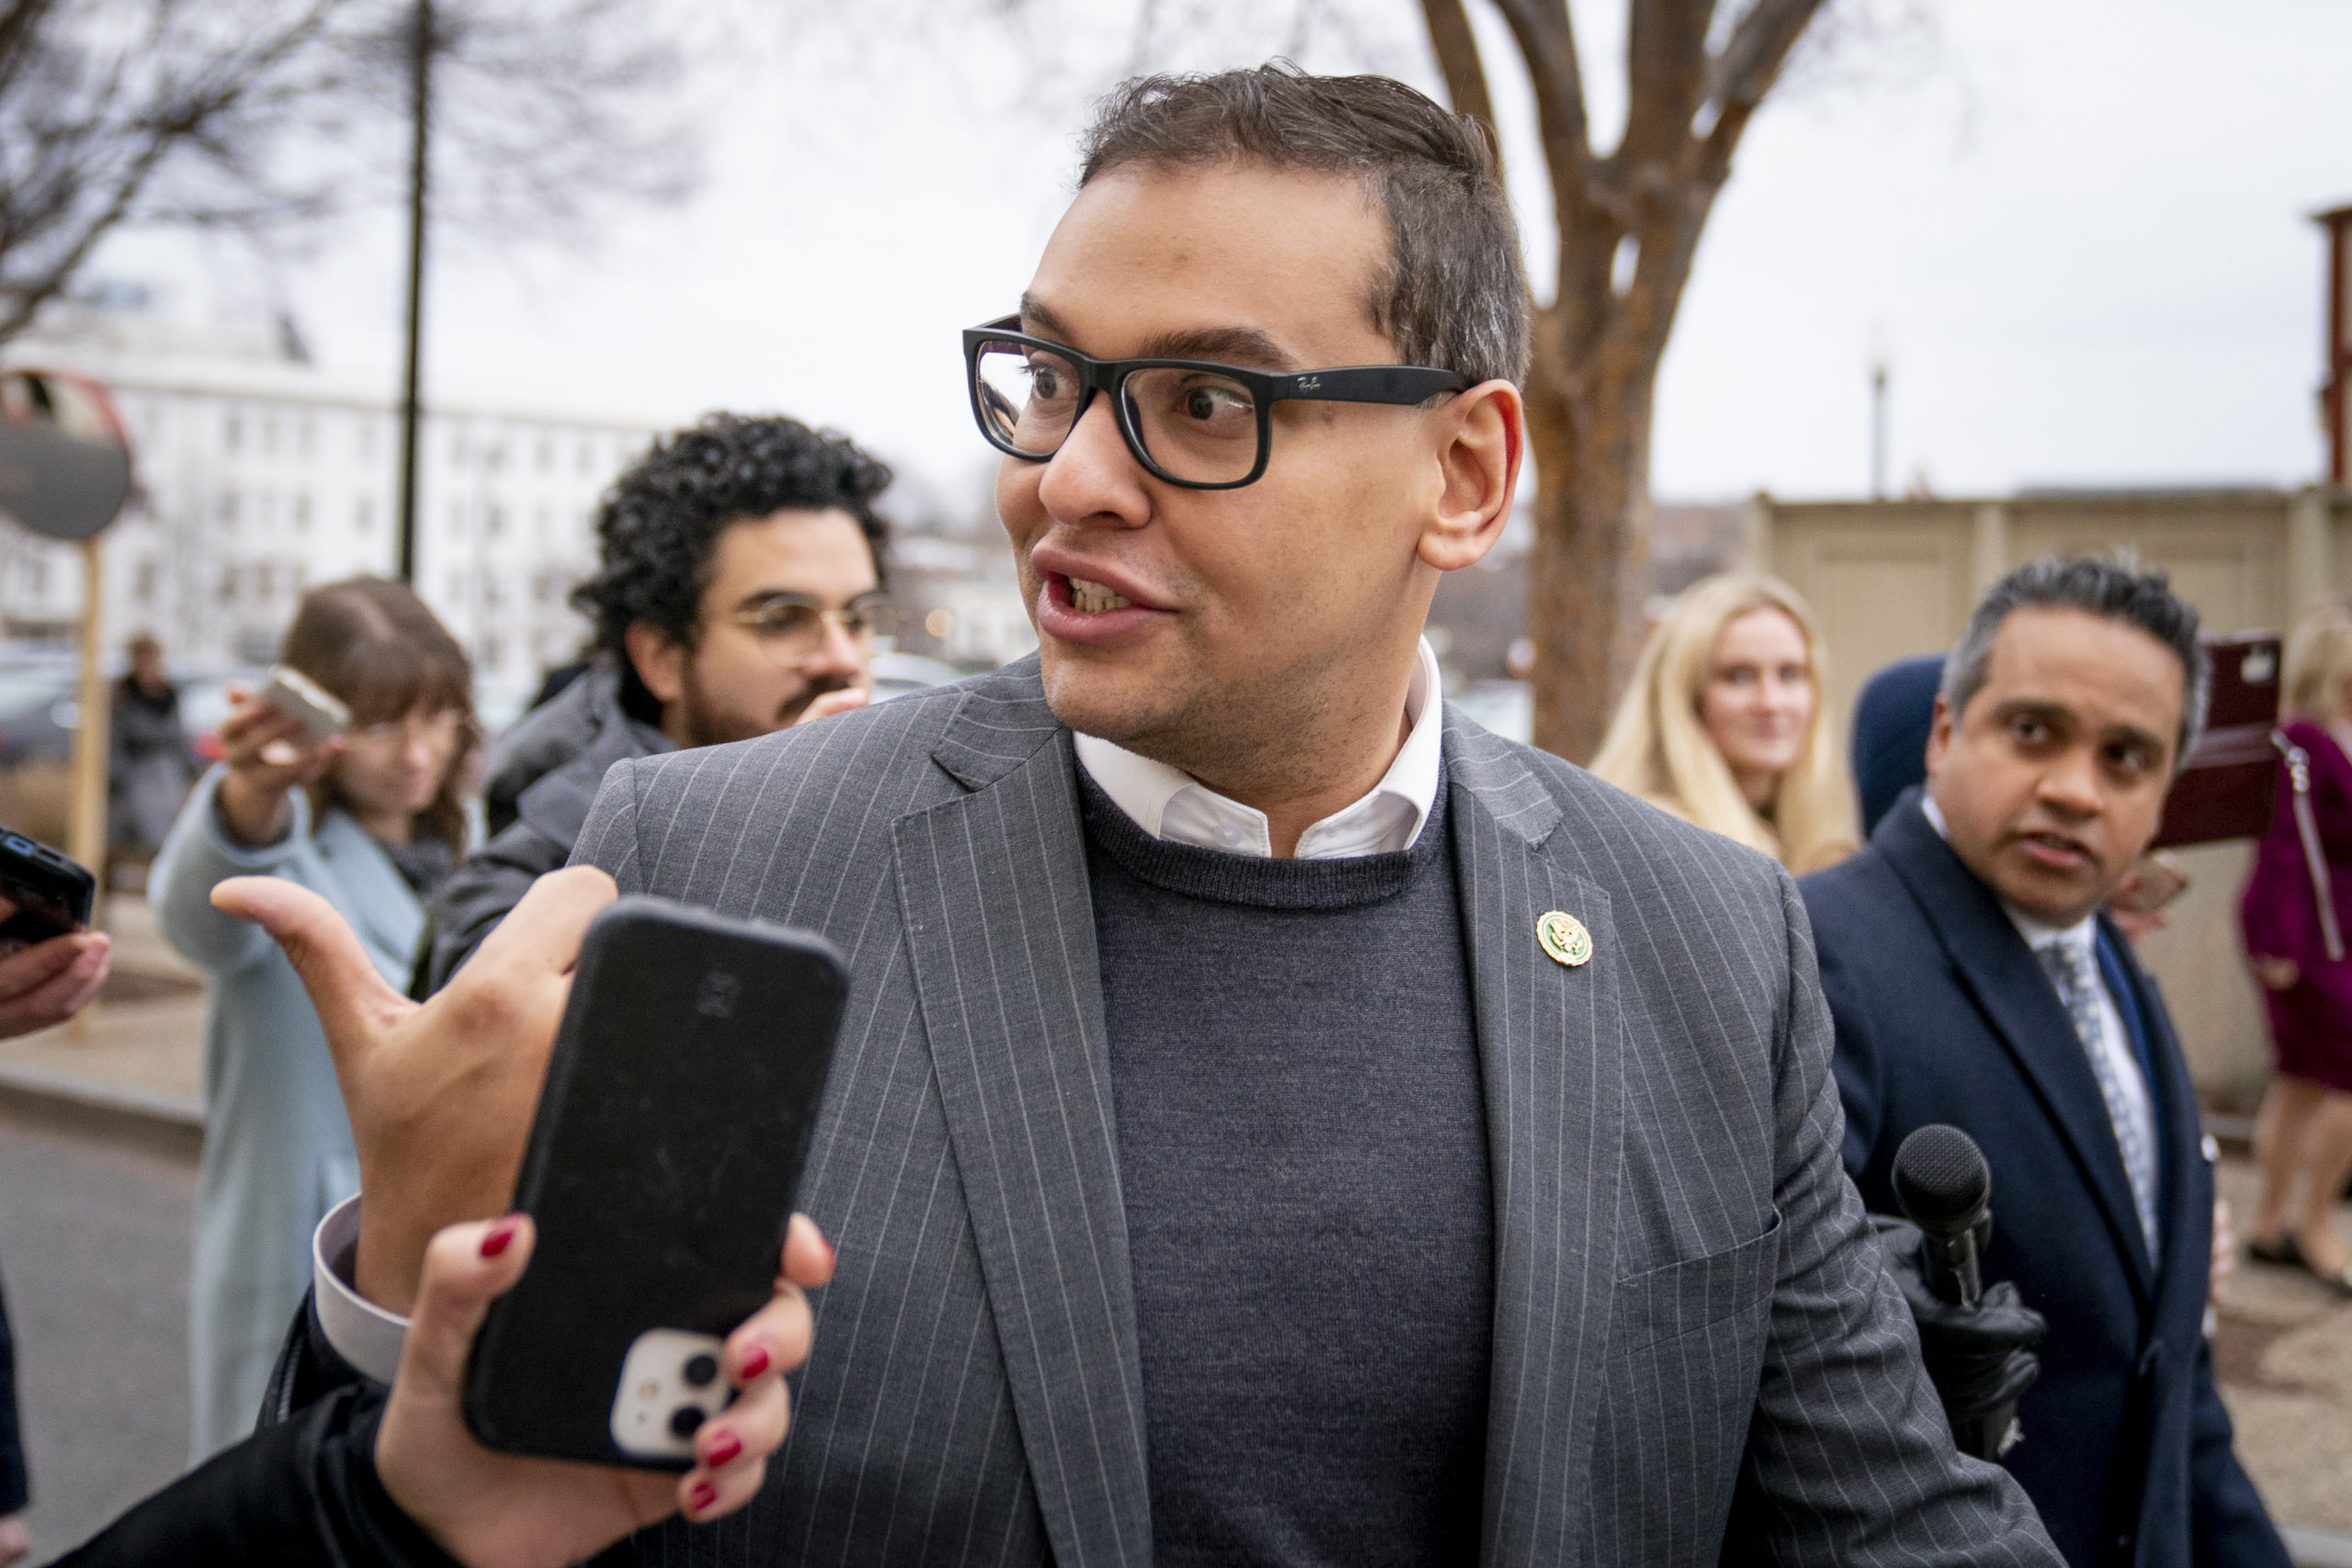 Republican Rep. George Santos of New York is seen in a file photo from January leaving a House GOP conference meeting on Capitol Hill in Washington. A federal indictment unsealed Wednesday charged Santos with seven counts of wire fraud, three counts of money laundering, one count of theft of public funds and two counts of making materially false statements to the House of Representatives.